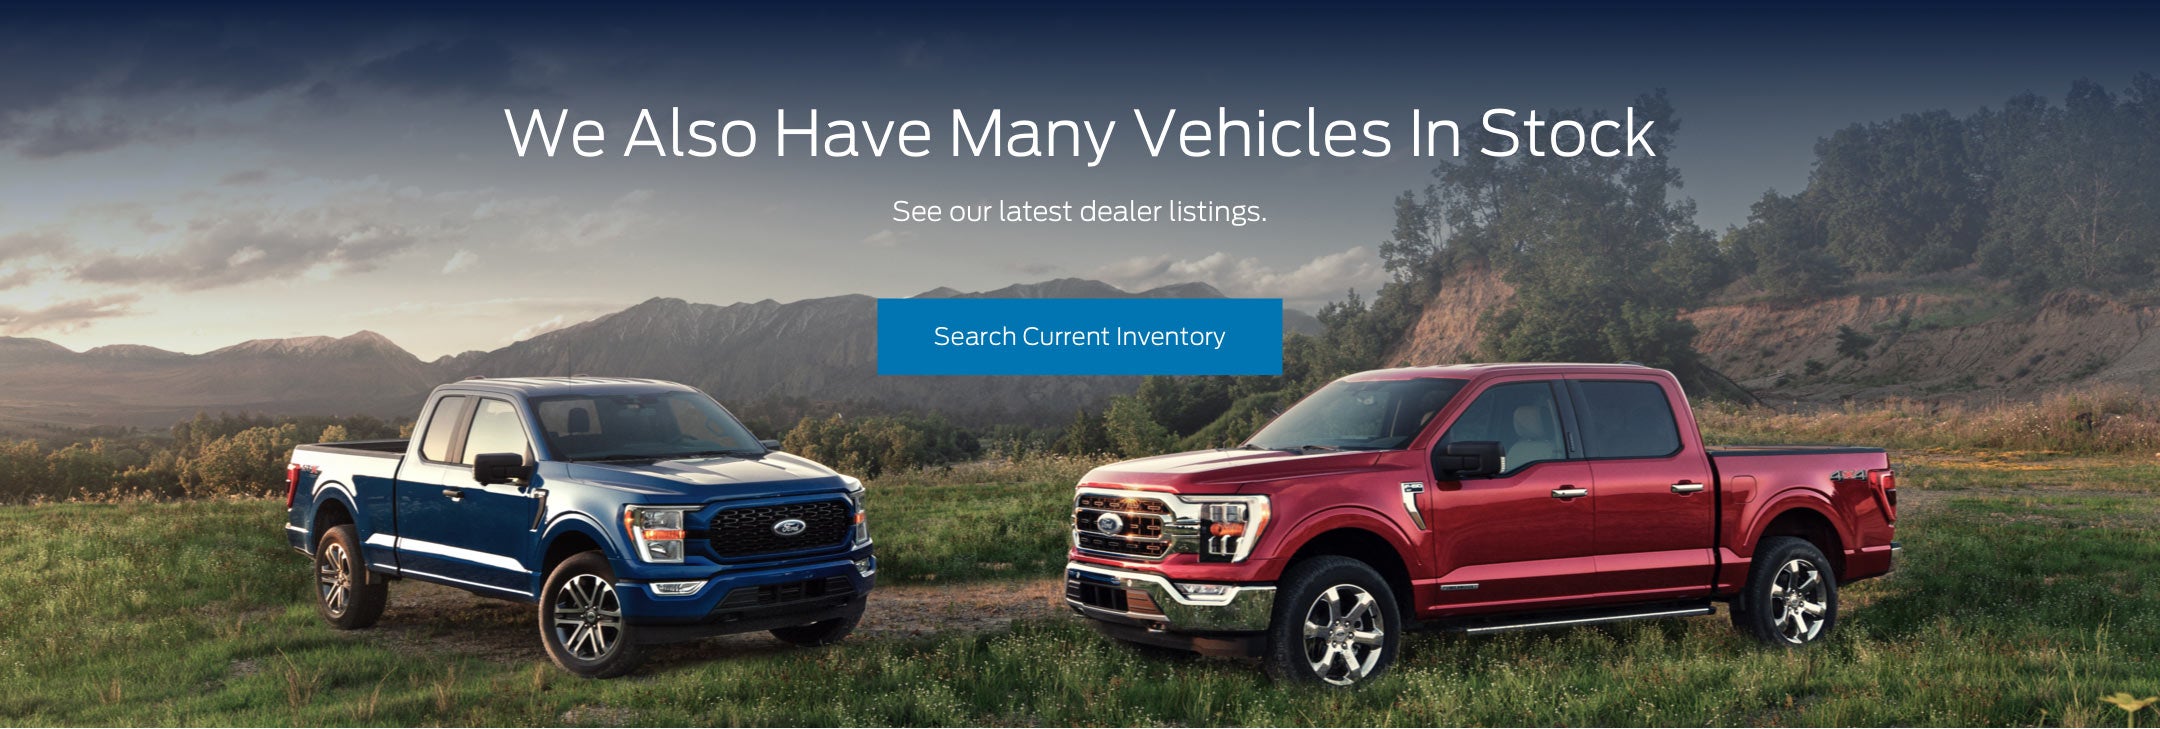 Ford vehicles in stock | Schicker Ford of St. Louis in St Louis MO